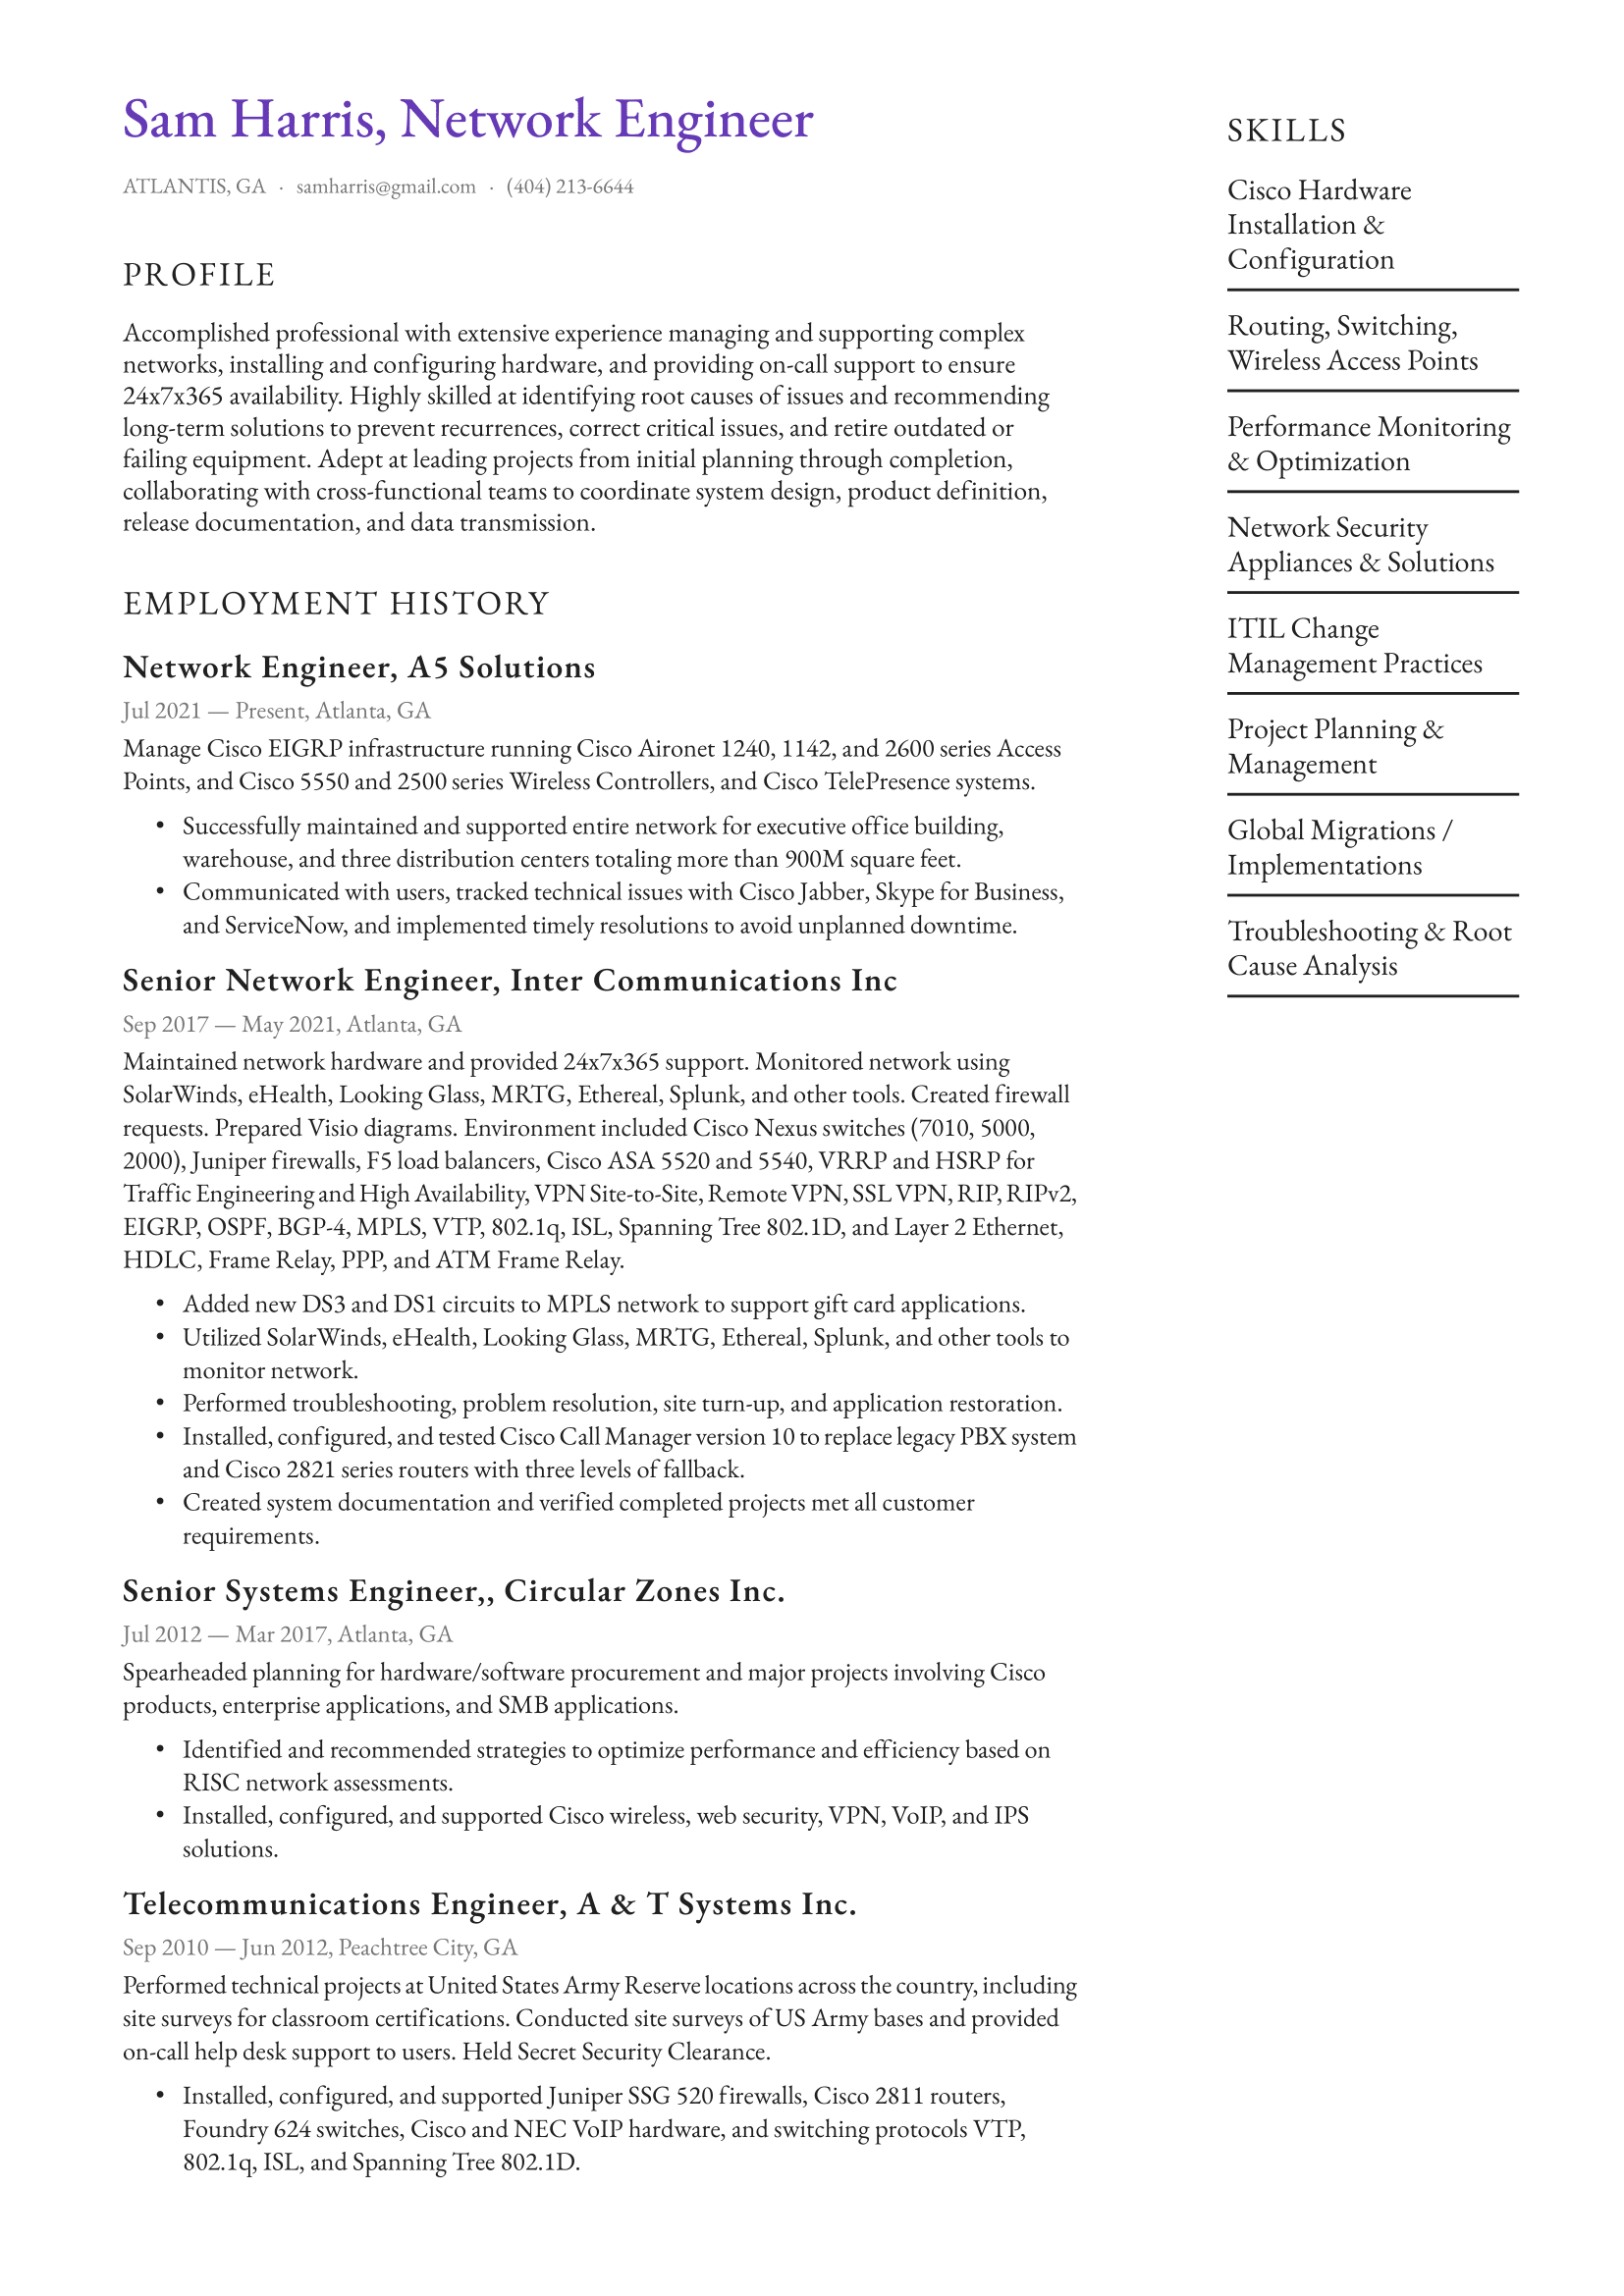 Network Engineer Resume Example & Writing Guide